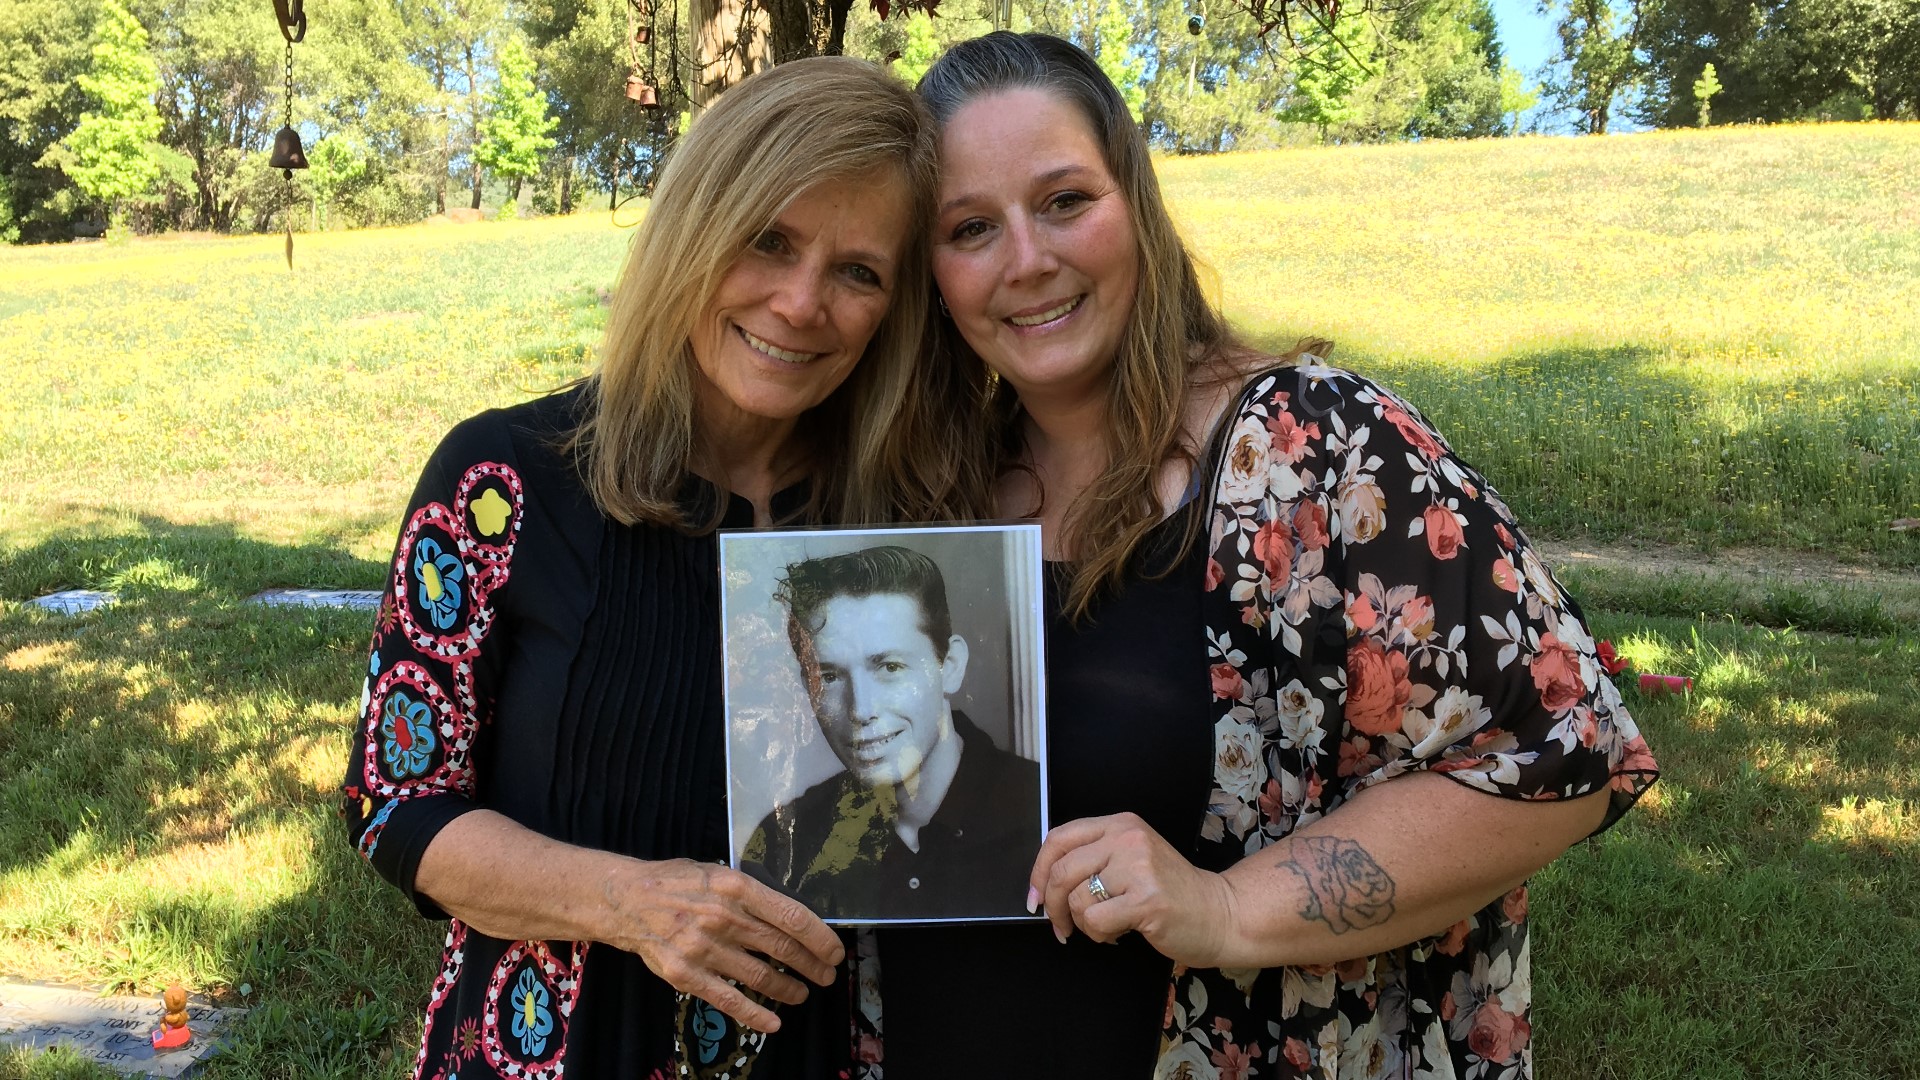 At Placerville cemetery, a Kansas woman's journey to find her long-lost family came to an end. She found her half-sister. It's a connection that Karen Wright and Shannon Armbruster plan to keep strong.